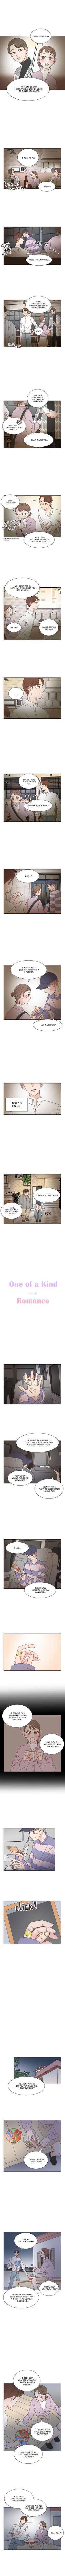 One Of A Kind Romance - Page 2